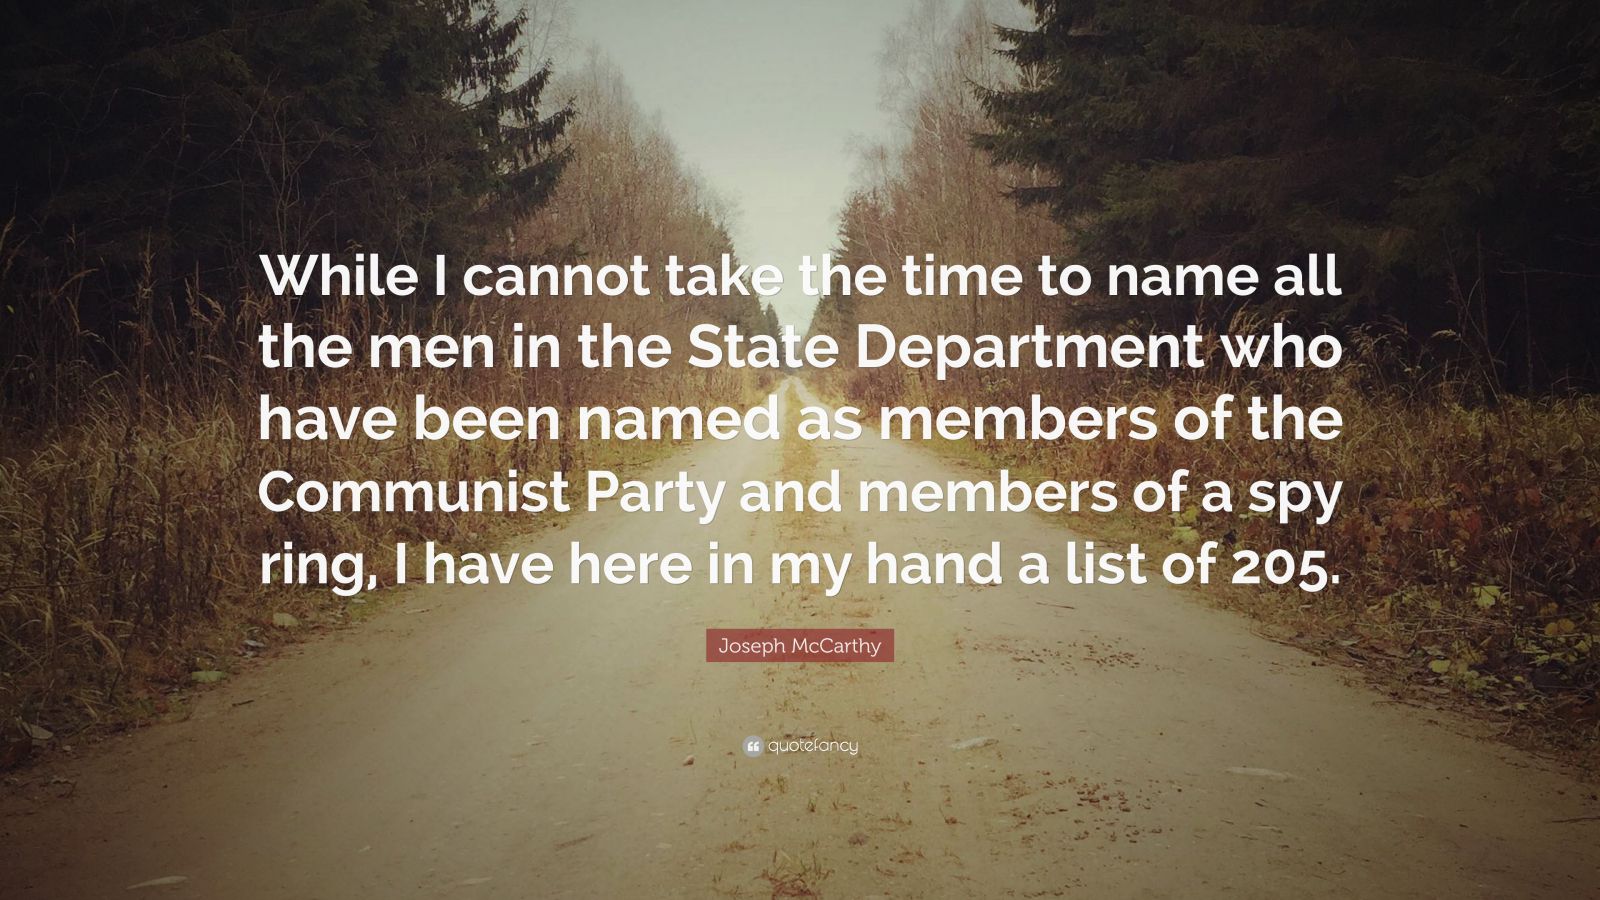 Joseph McCarthy Quote: "While I cannot take the time to name all the men in the State Department ...